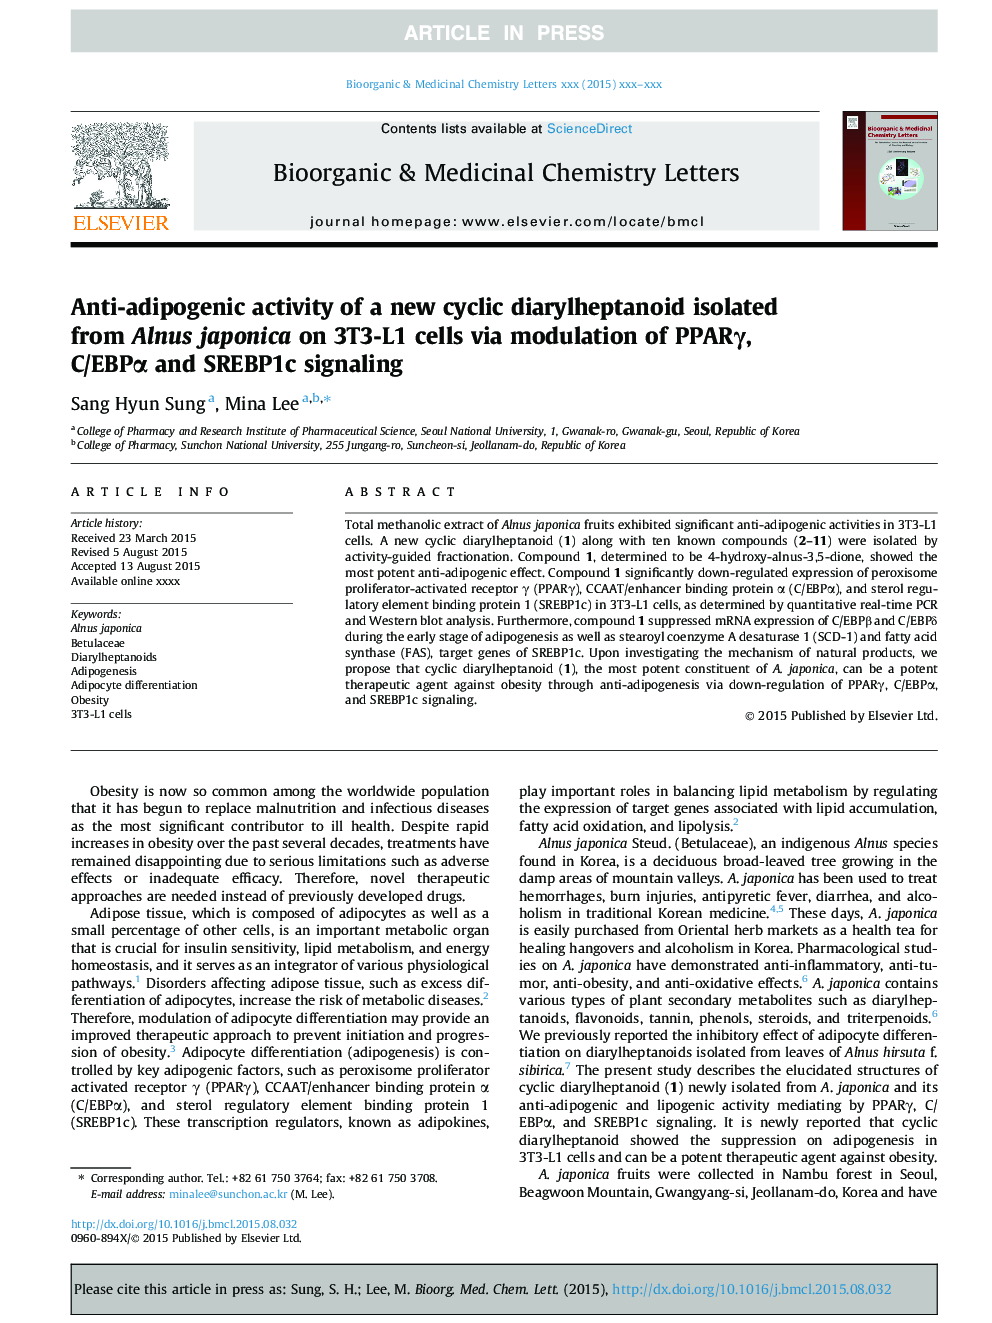 Anti-adipogenic activity of a new cyclic diarylheptanoid isolated from Alnus japonica on 3T3-L1 cells via modulation of PPARÎ³, C/EBPÎ± and SREBP1c signaling